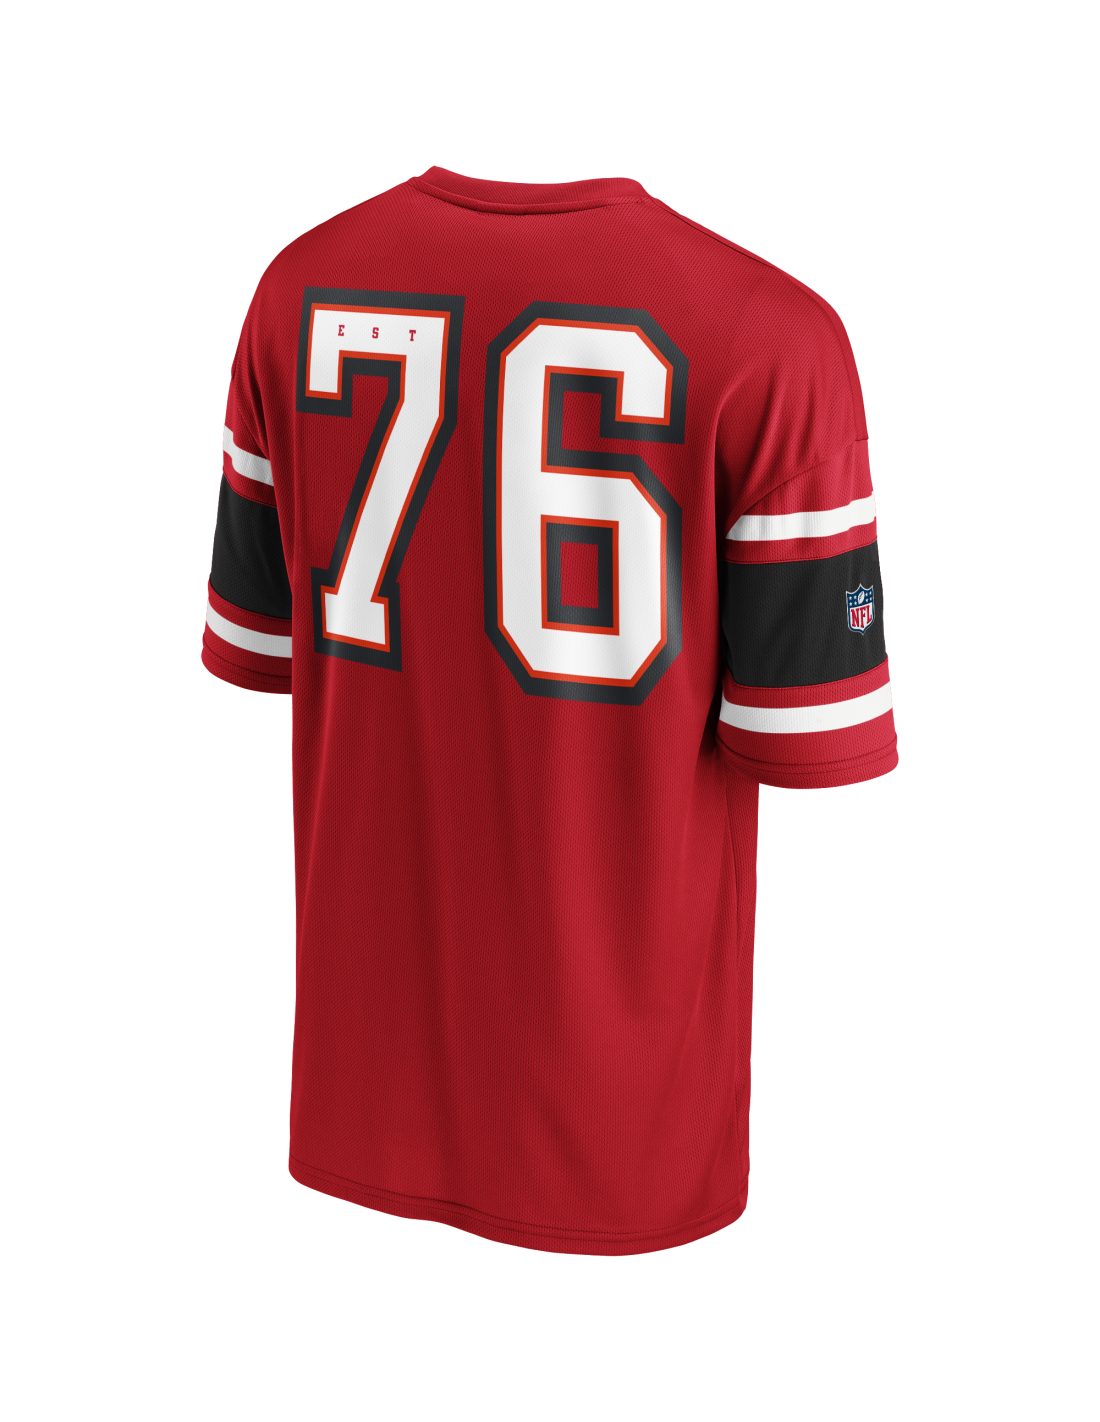 Tampa Bay Buccaneers Foundation Supporters Jersey